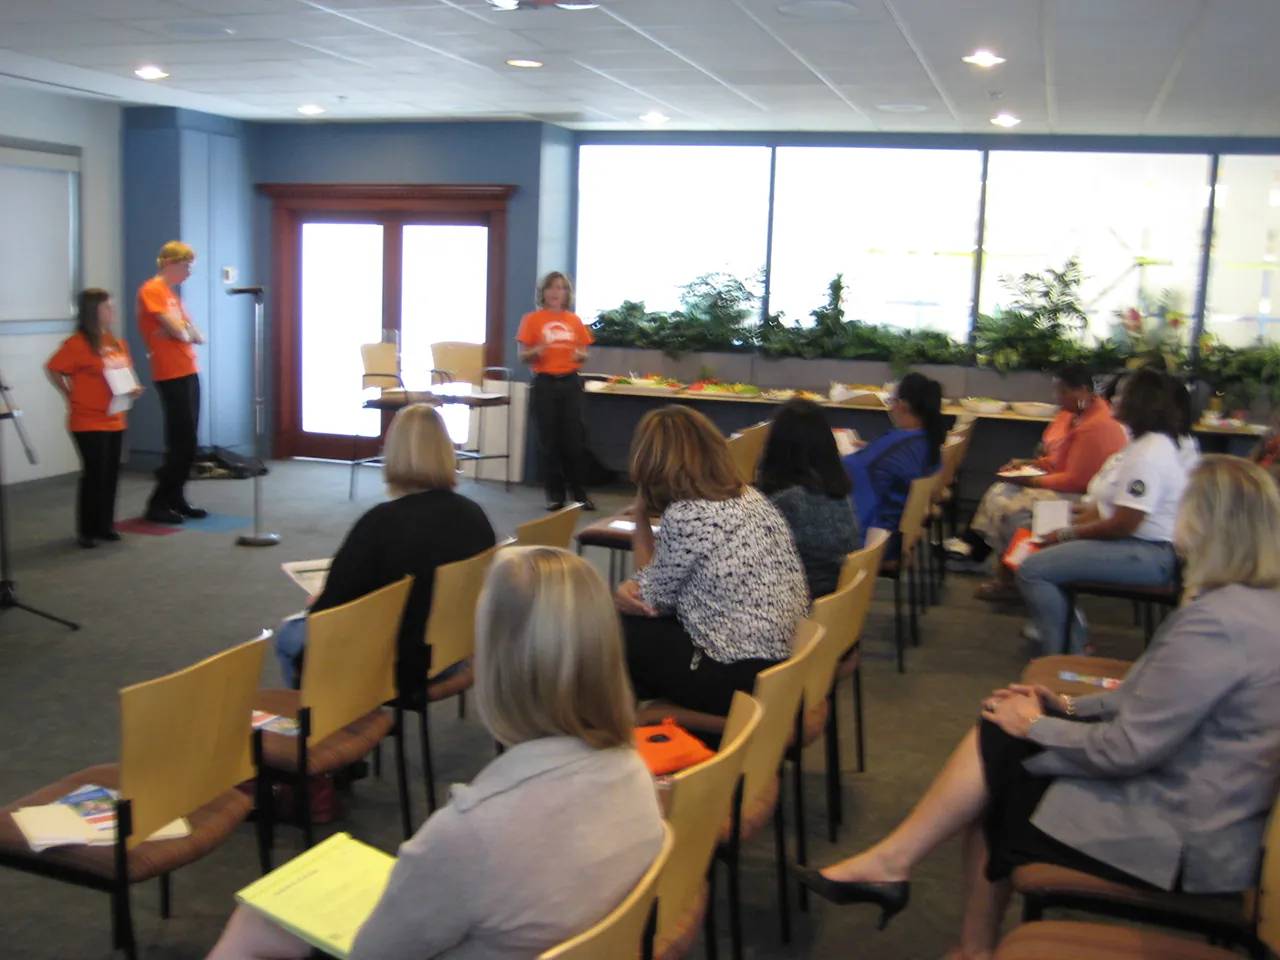 A photo shows the Northern Trust Bank staff watching a presentation presented by the Disability Awareness Players.